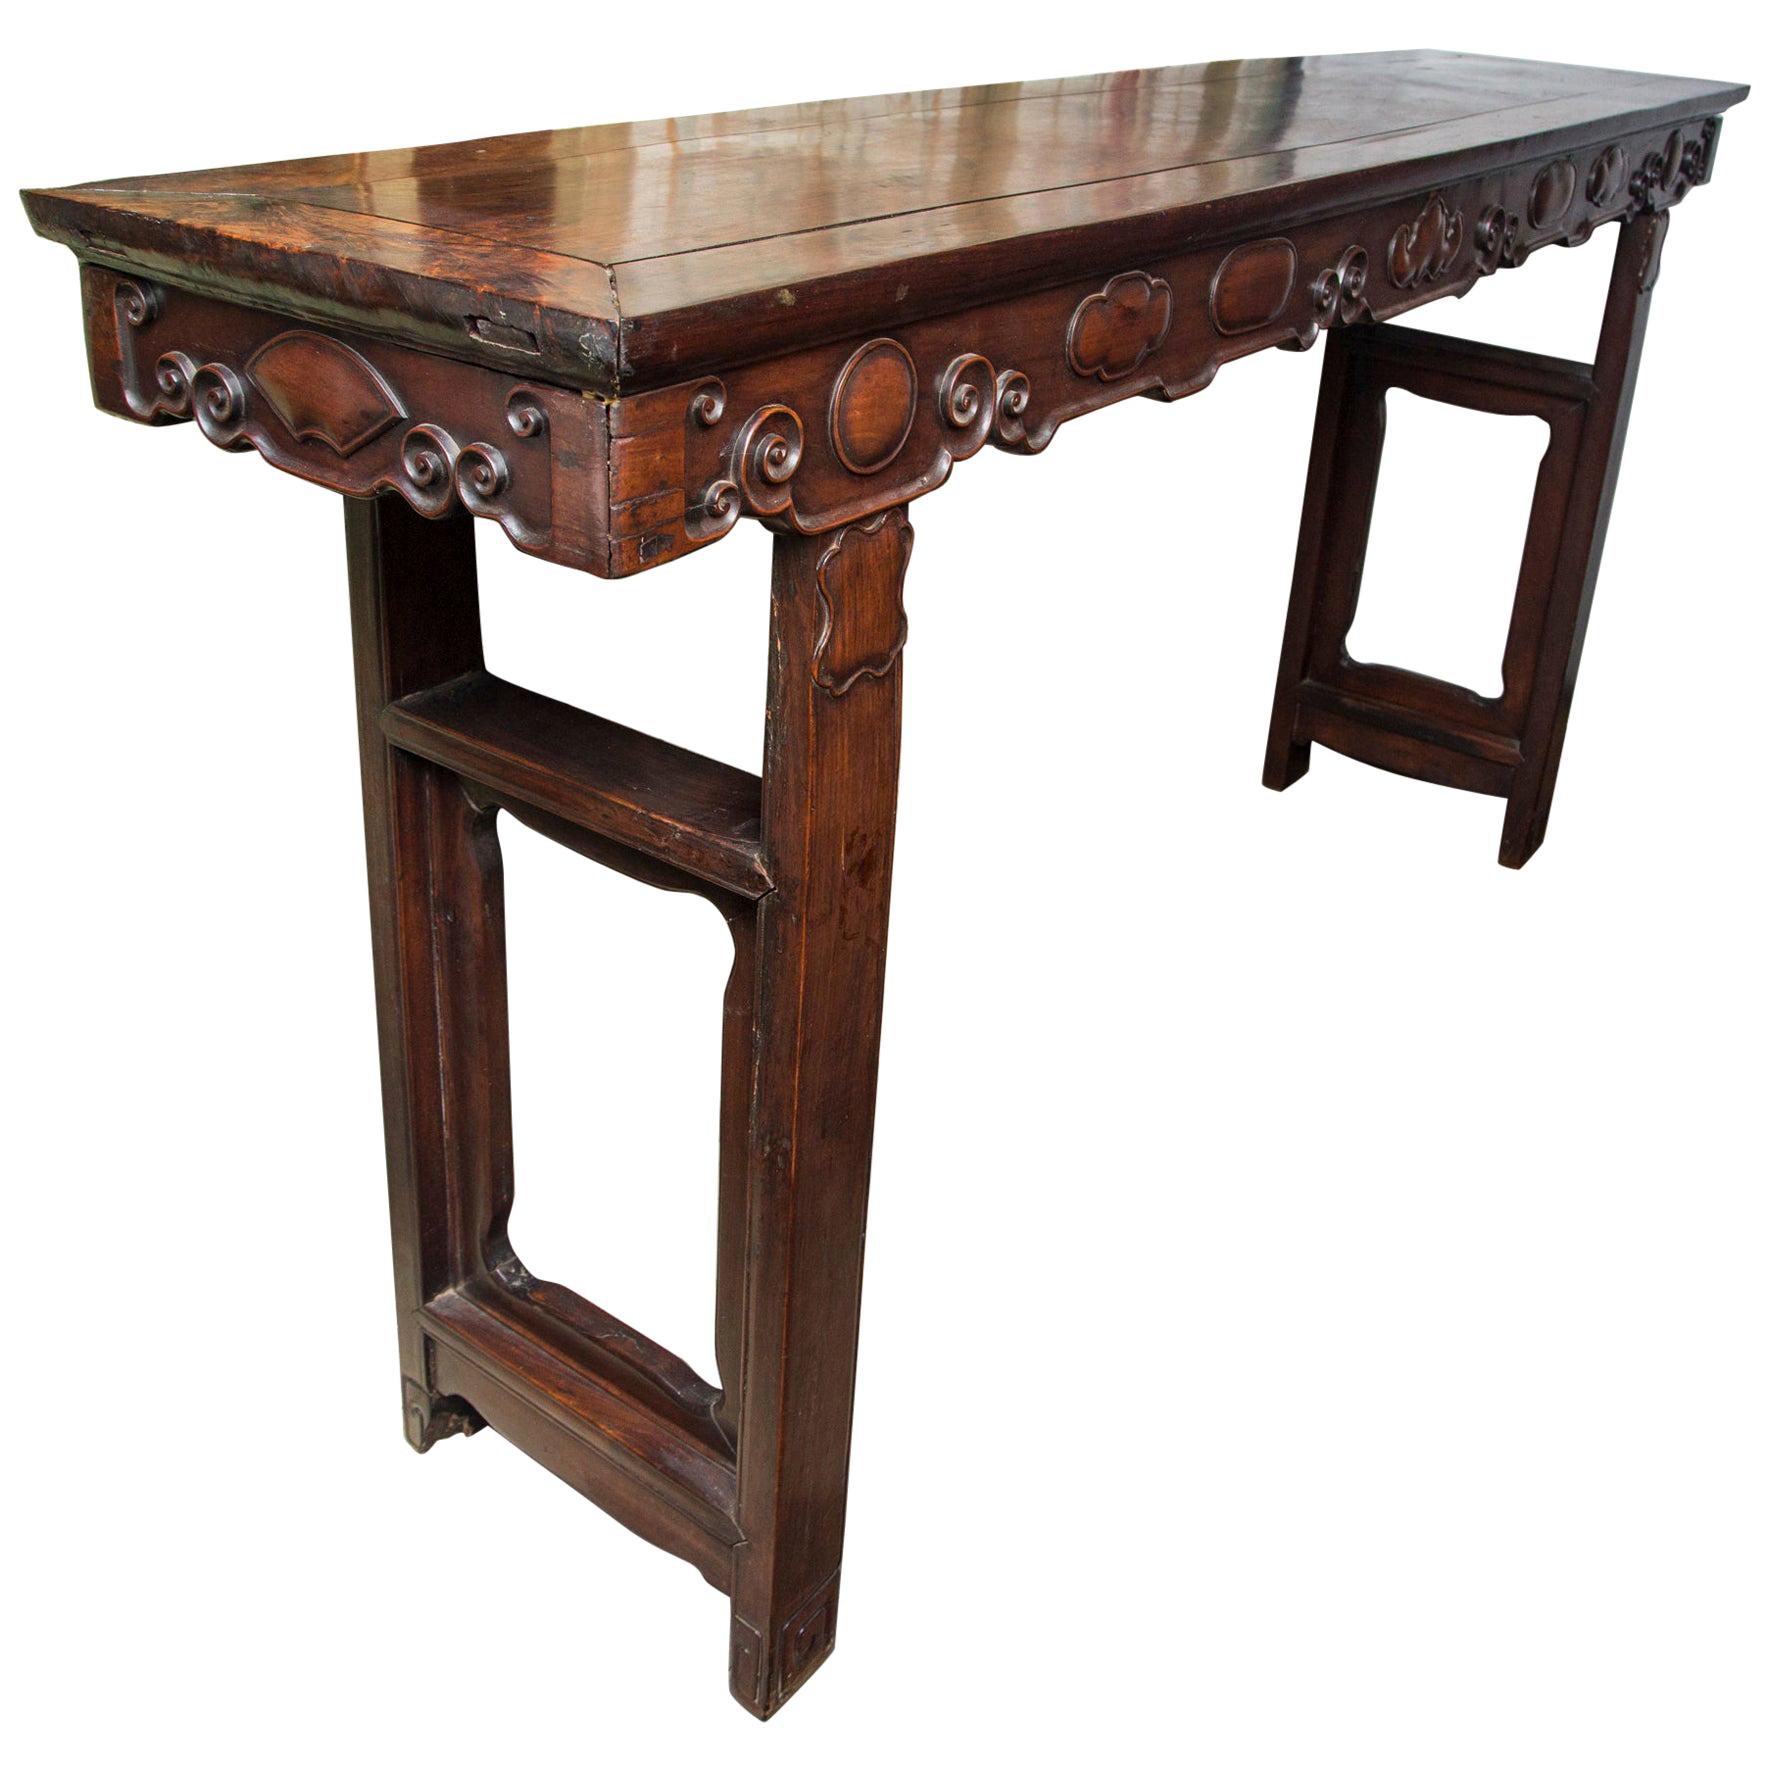 17th-18th Century Chinese Hard Wood Altar Table